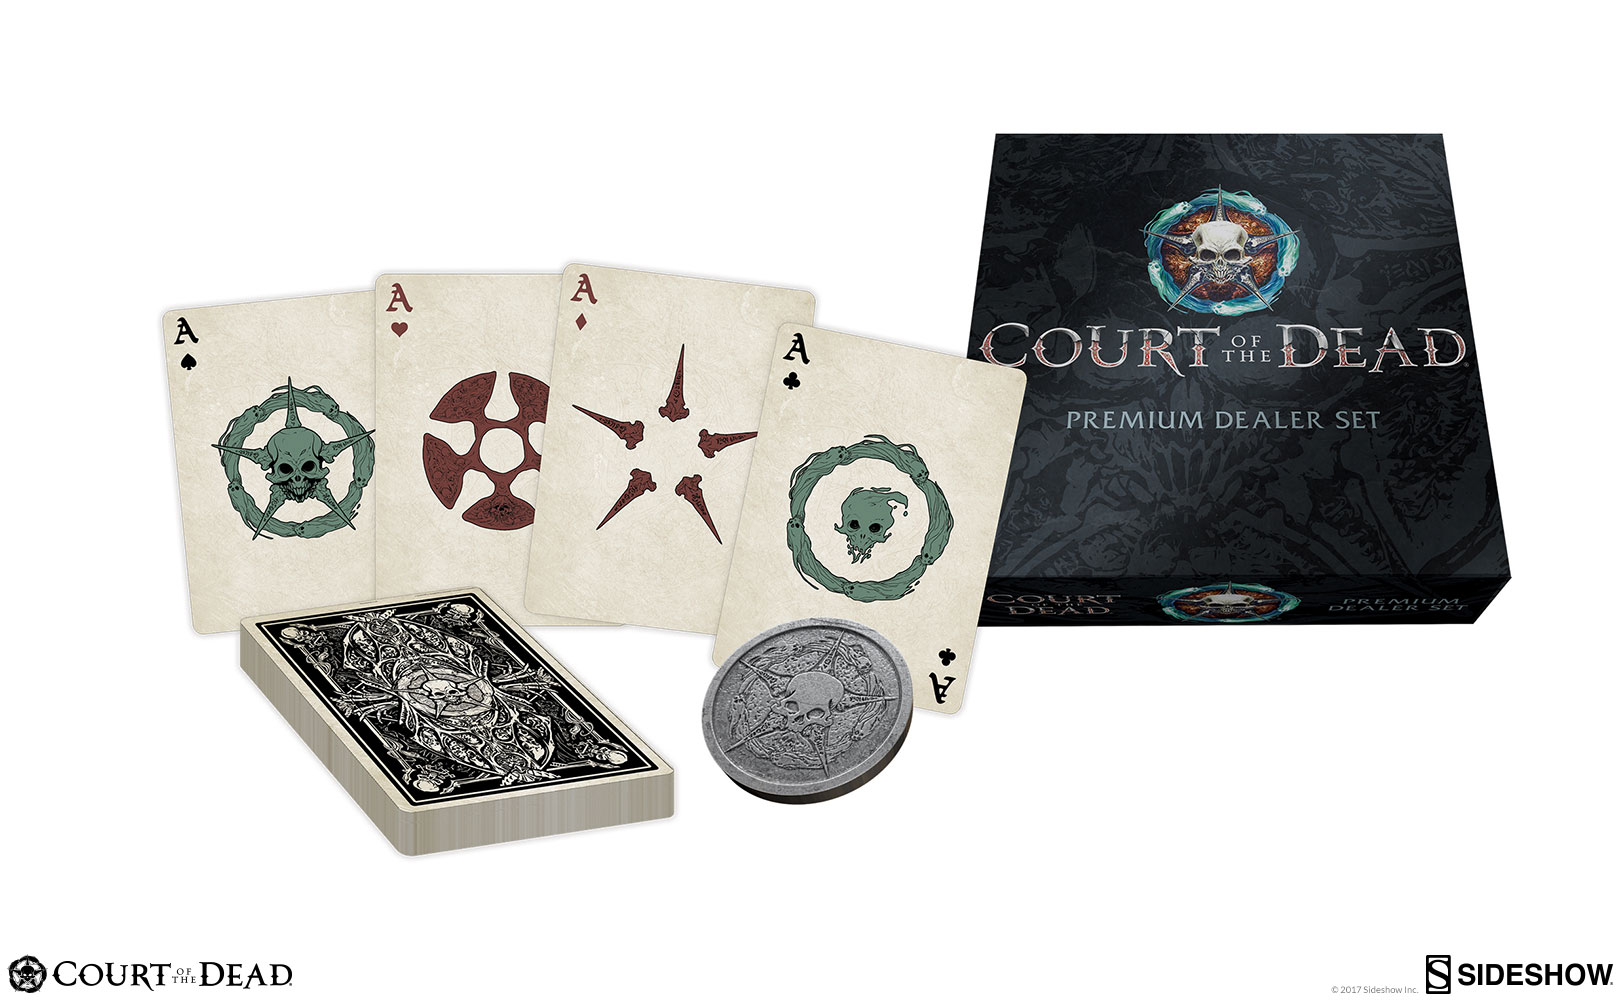 court-of-the-dead-playing-card-set-usaopoly-sideshow-903212-01.jpg